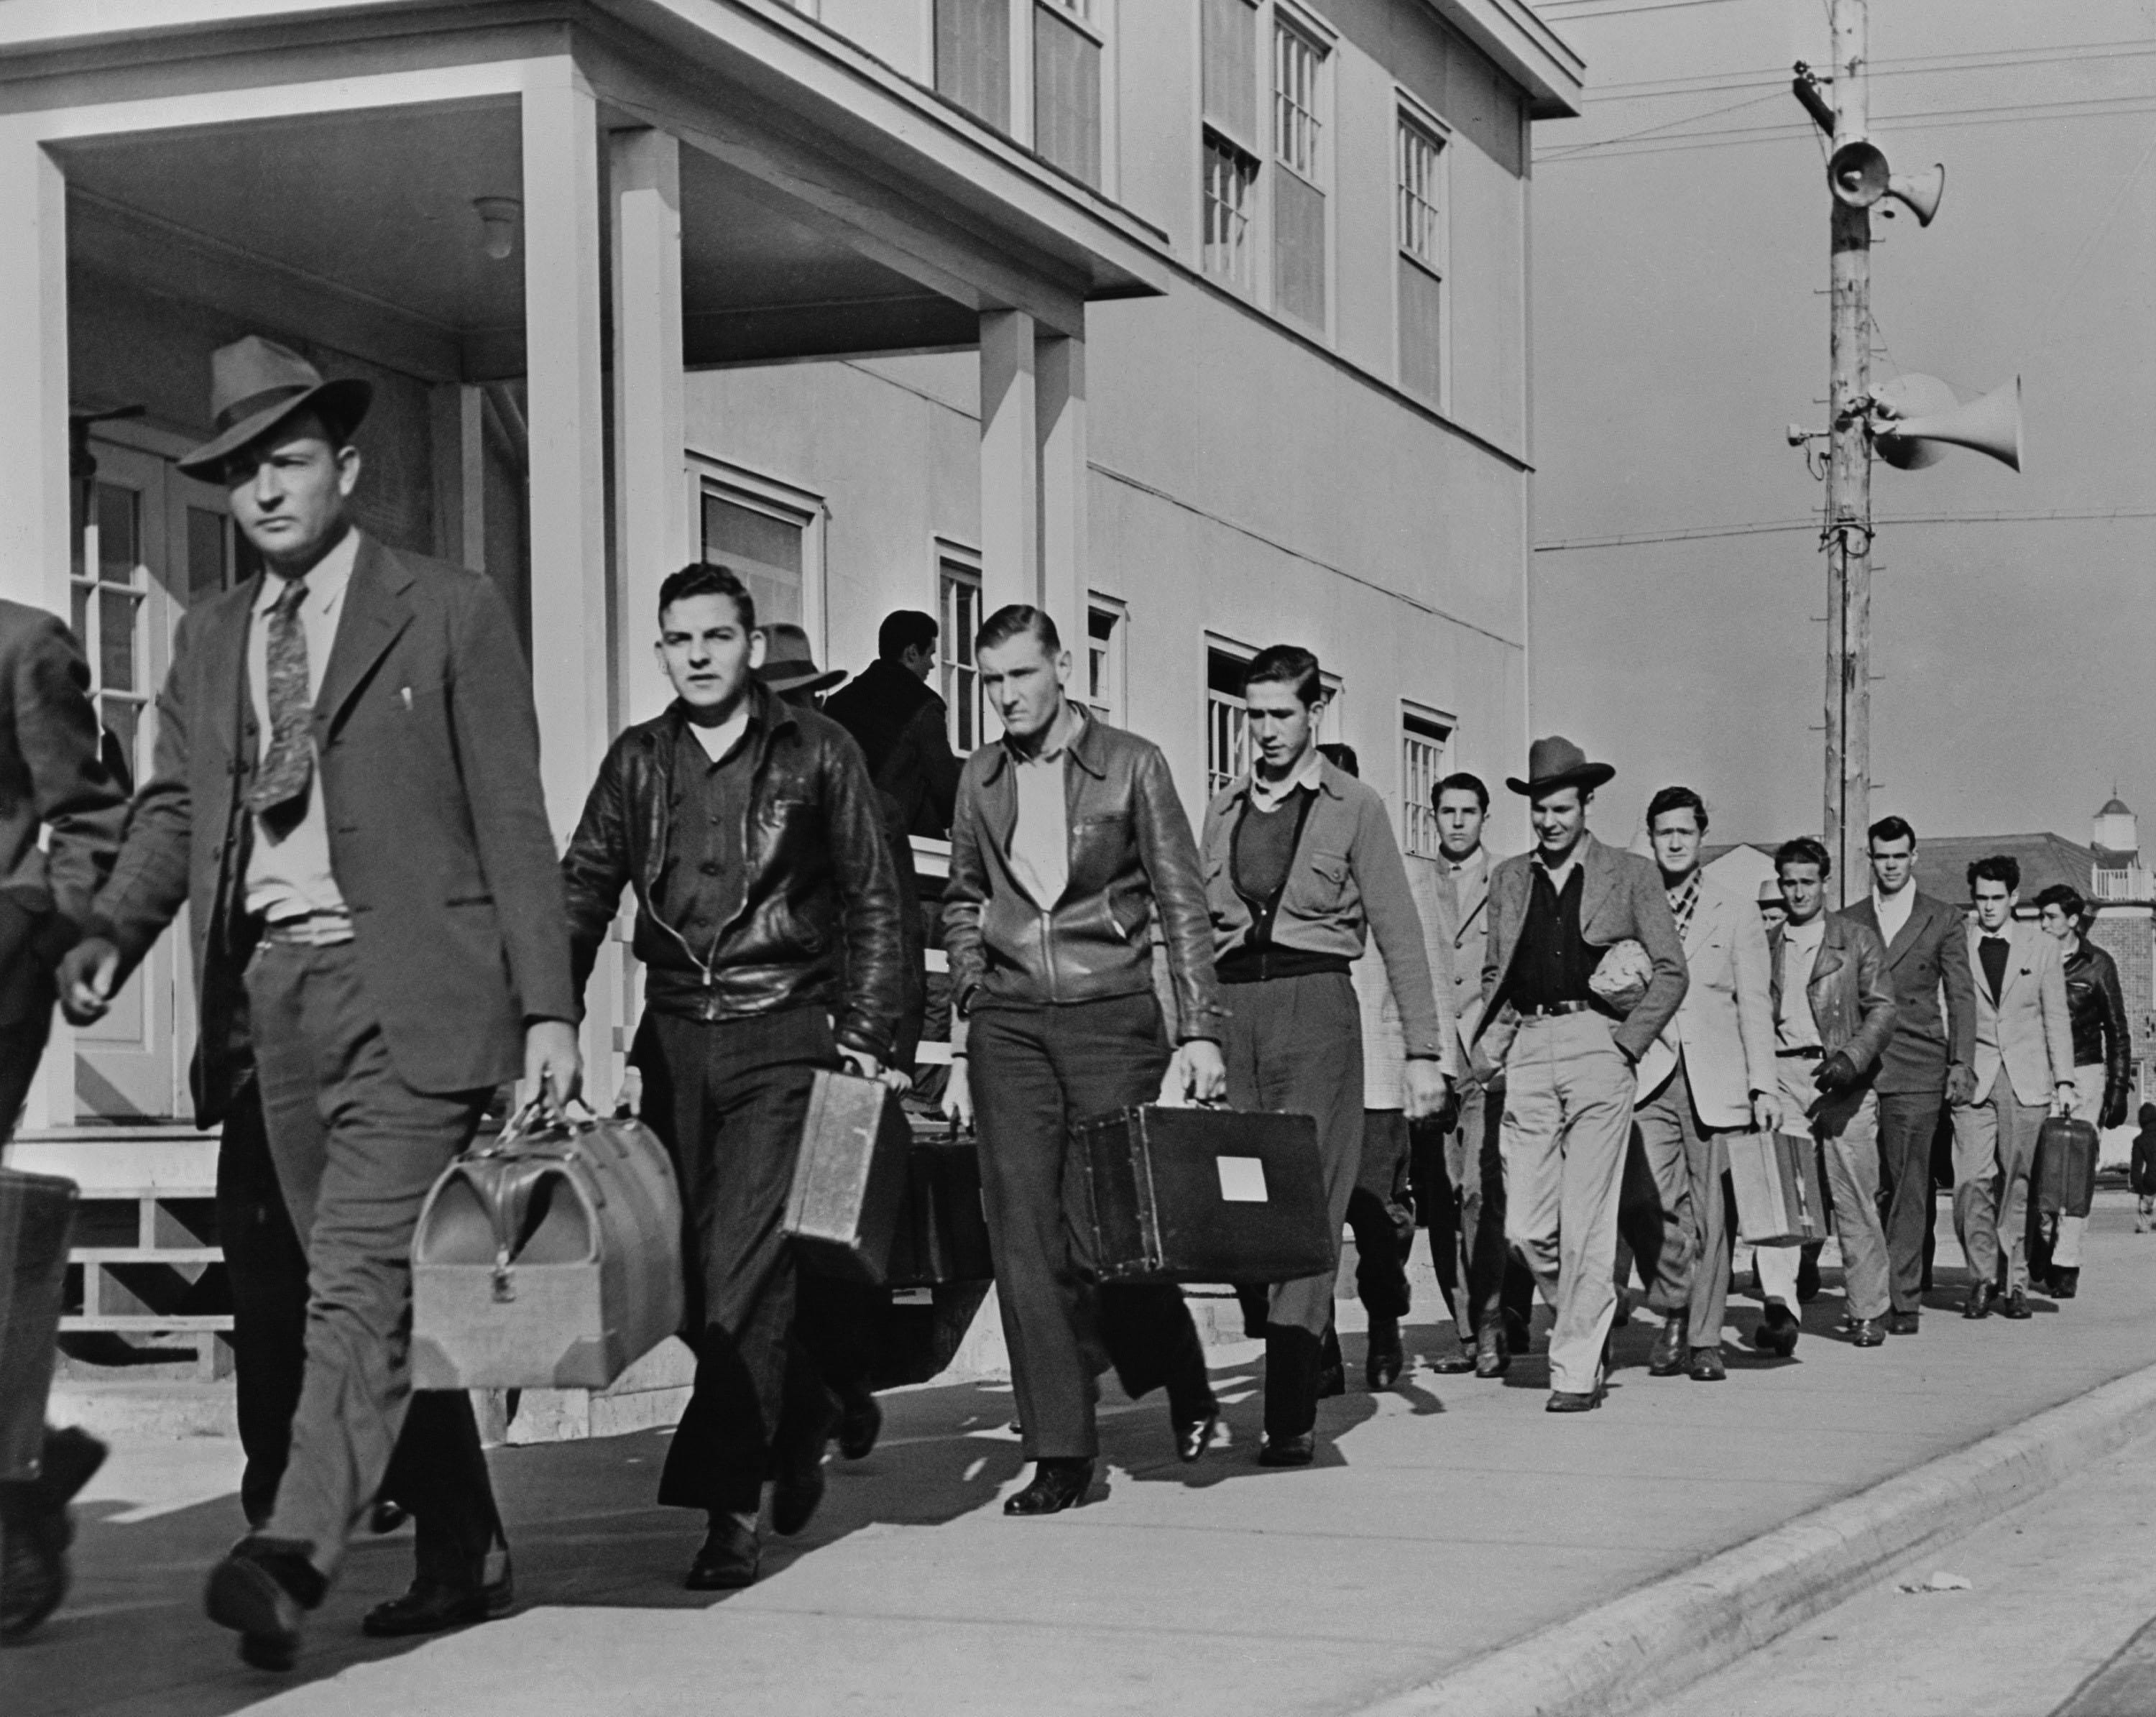 Enrollees from across the country arriving at the United States Maritime Service training station at Sheepshead Bay, New York, early 1940s.